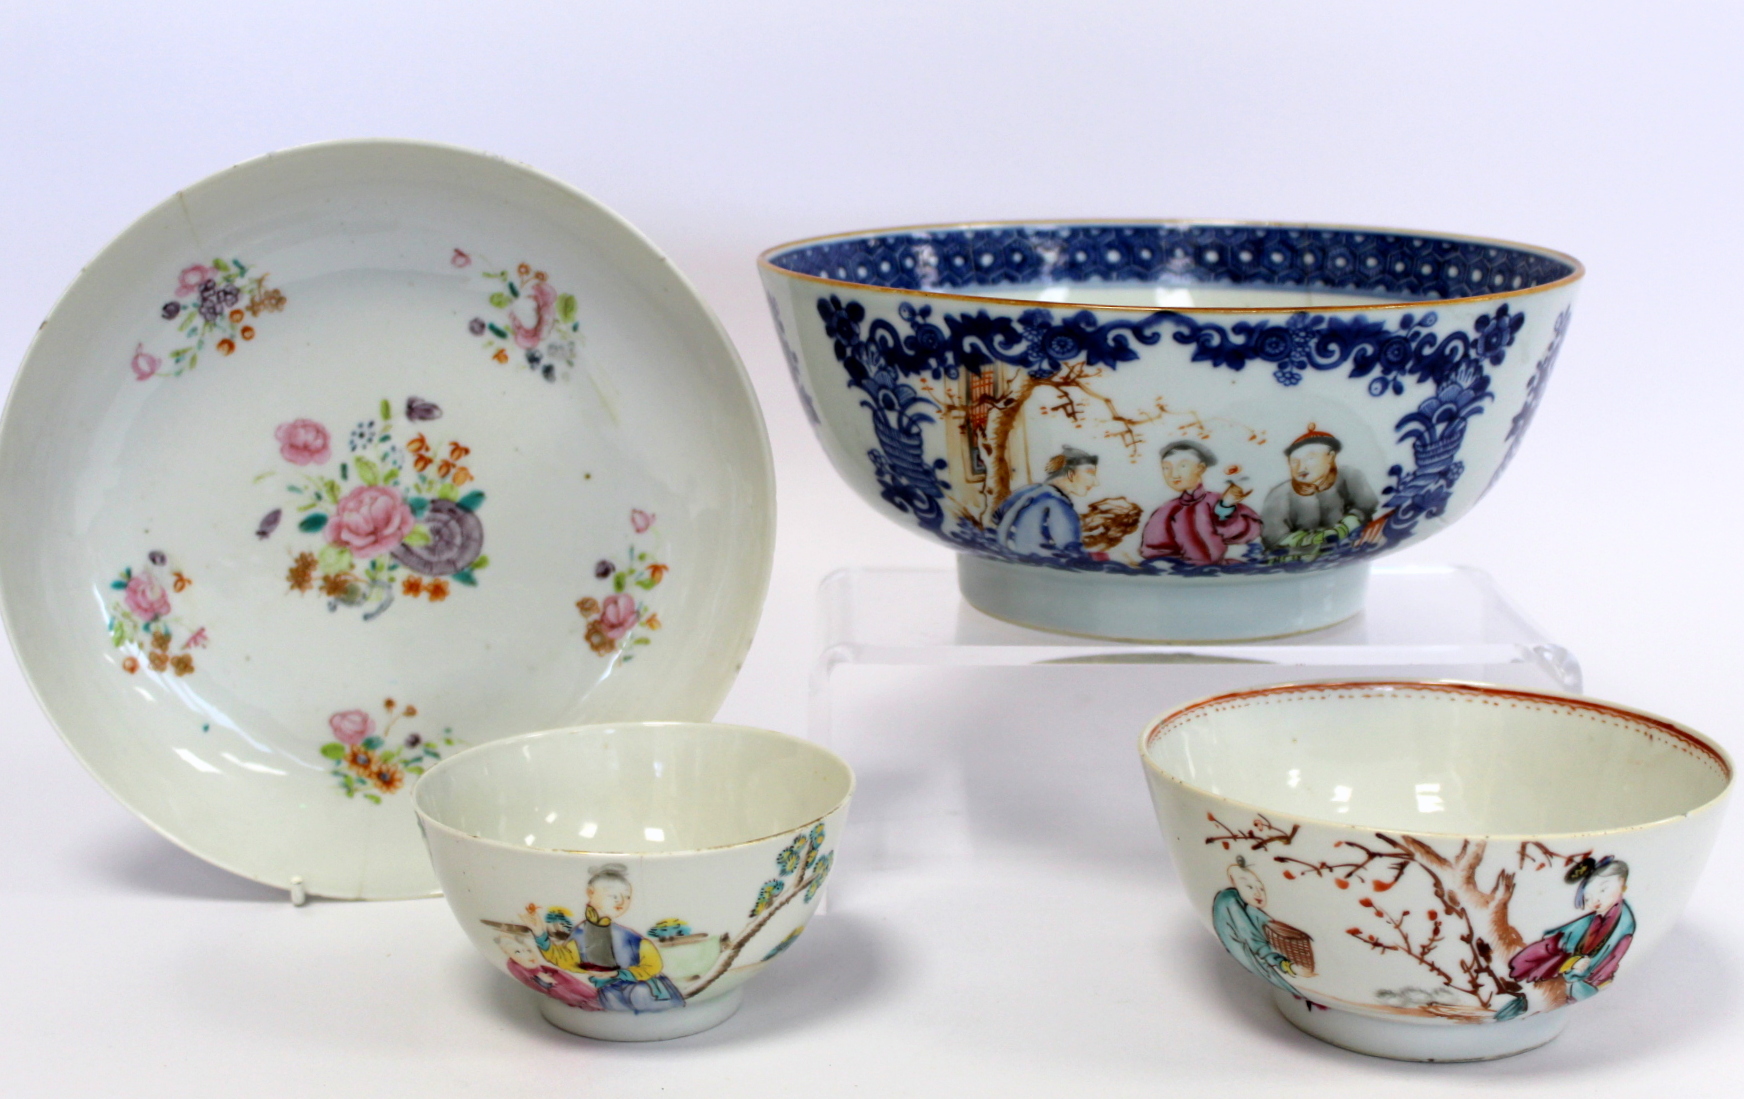 Four pieces of 18th century Chinese porcelain, comprising: circular punch bowl with polychrome